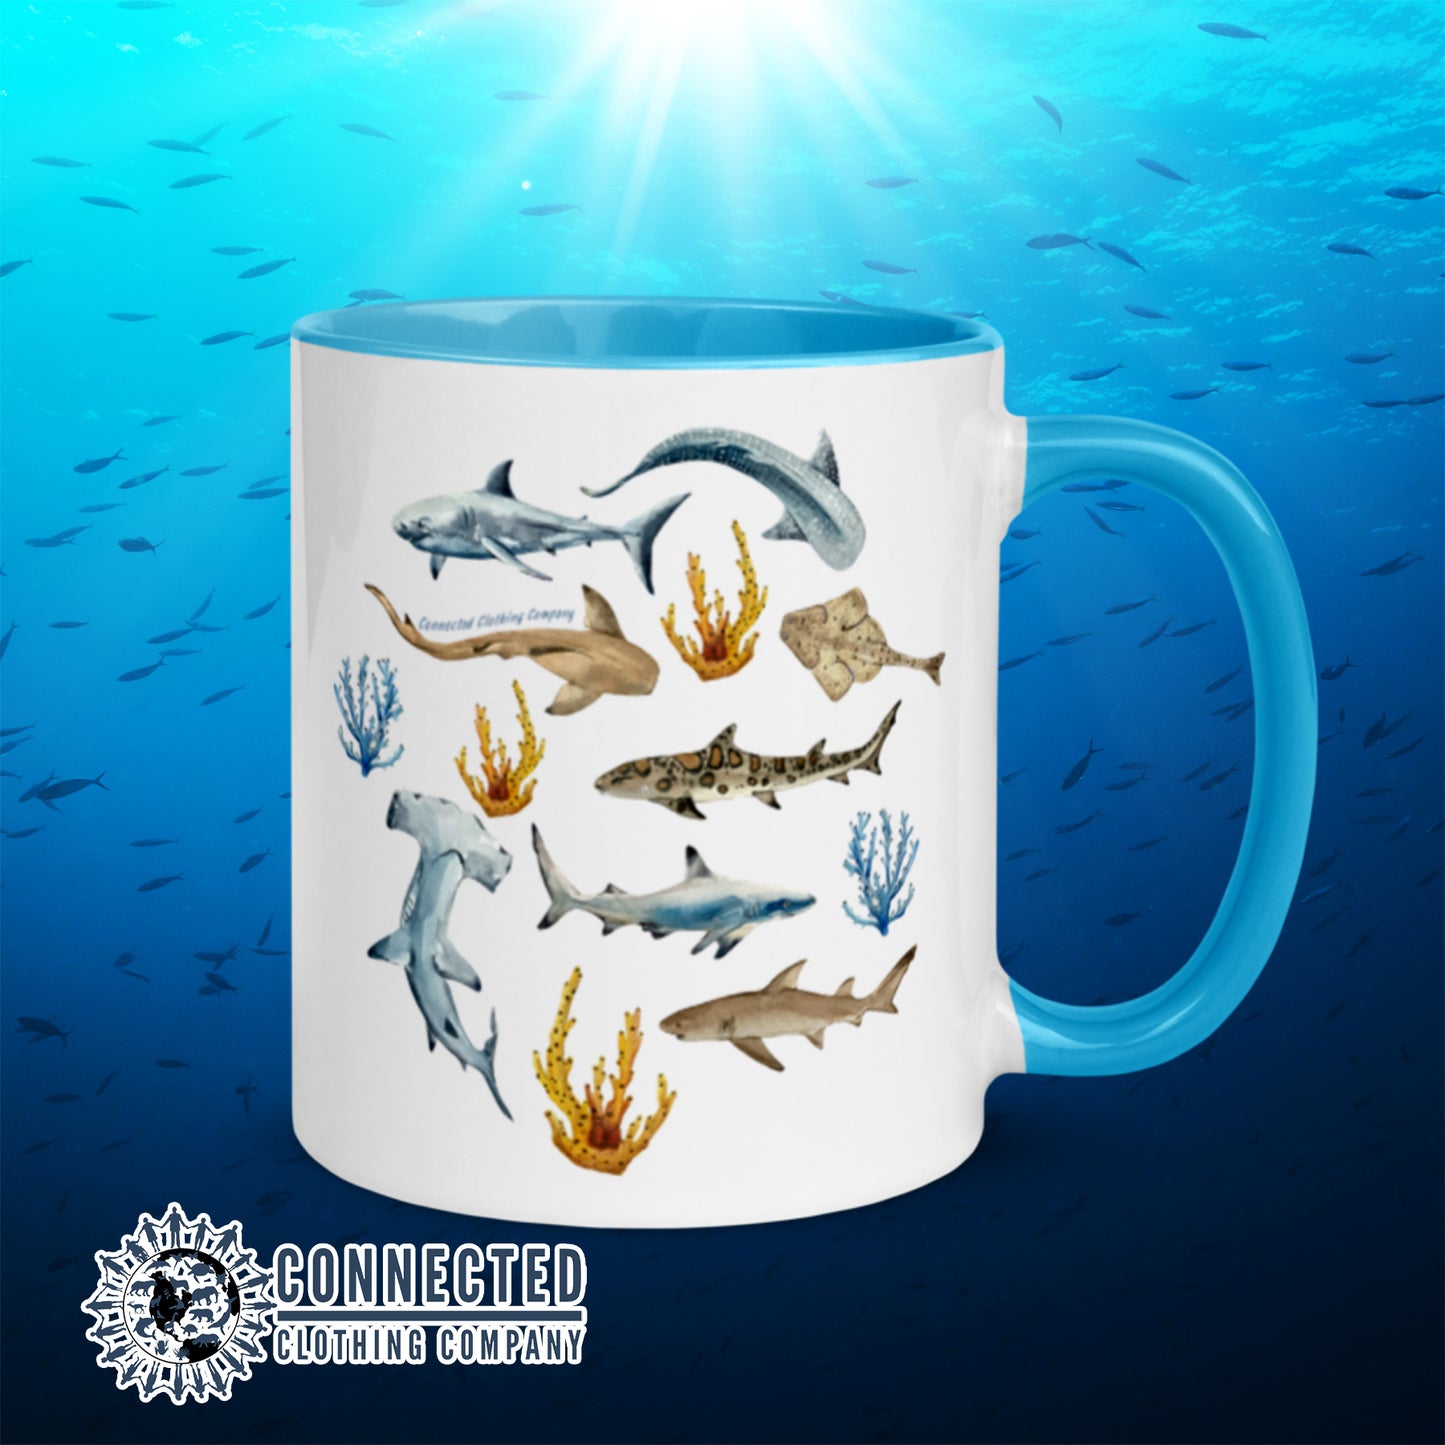 Shark Ocean Watercolor Colored Mug With Blue Coloring on Inside, Rim, and Handle - sweetsherriloudesigns - Ethically and Sustainably Made - 10% donated to Oceana shark conservation